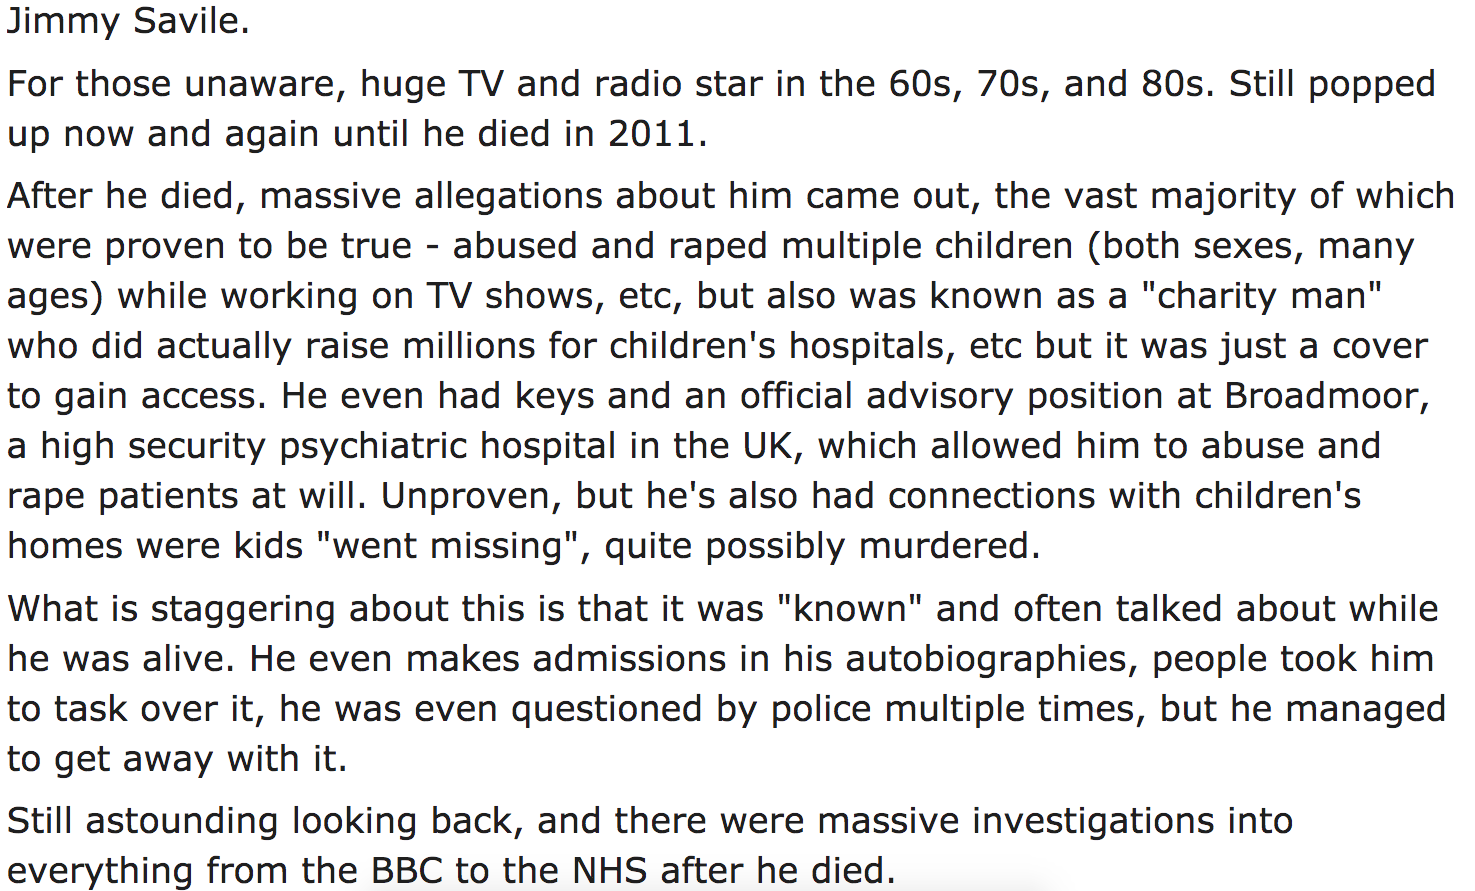 celebrity crimes - For those unaware, huge Tv and radio star in the 60s, 70s, and 80s. Still popped up now and again until he died in 2011. After he died, massive allegations about him came out, the vast majority of which were proven to be true abused